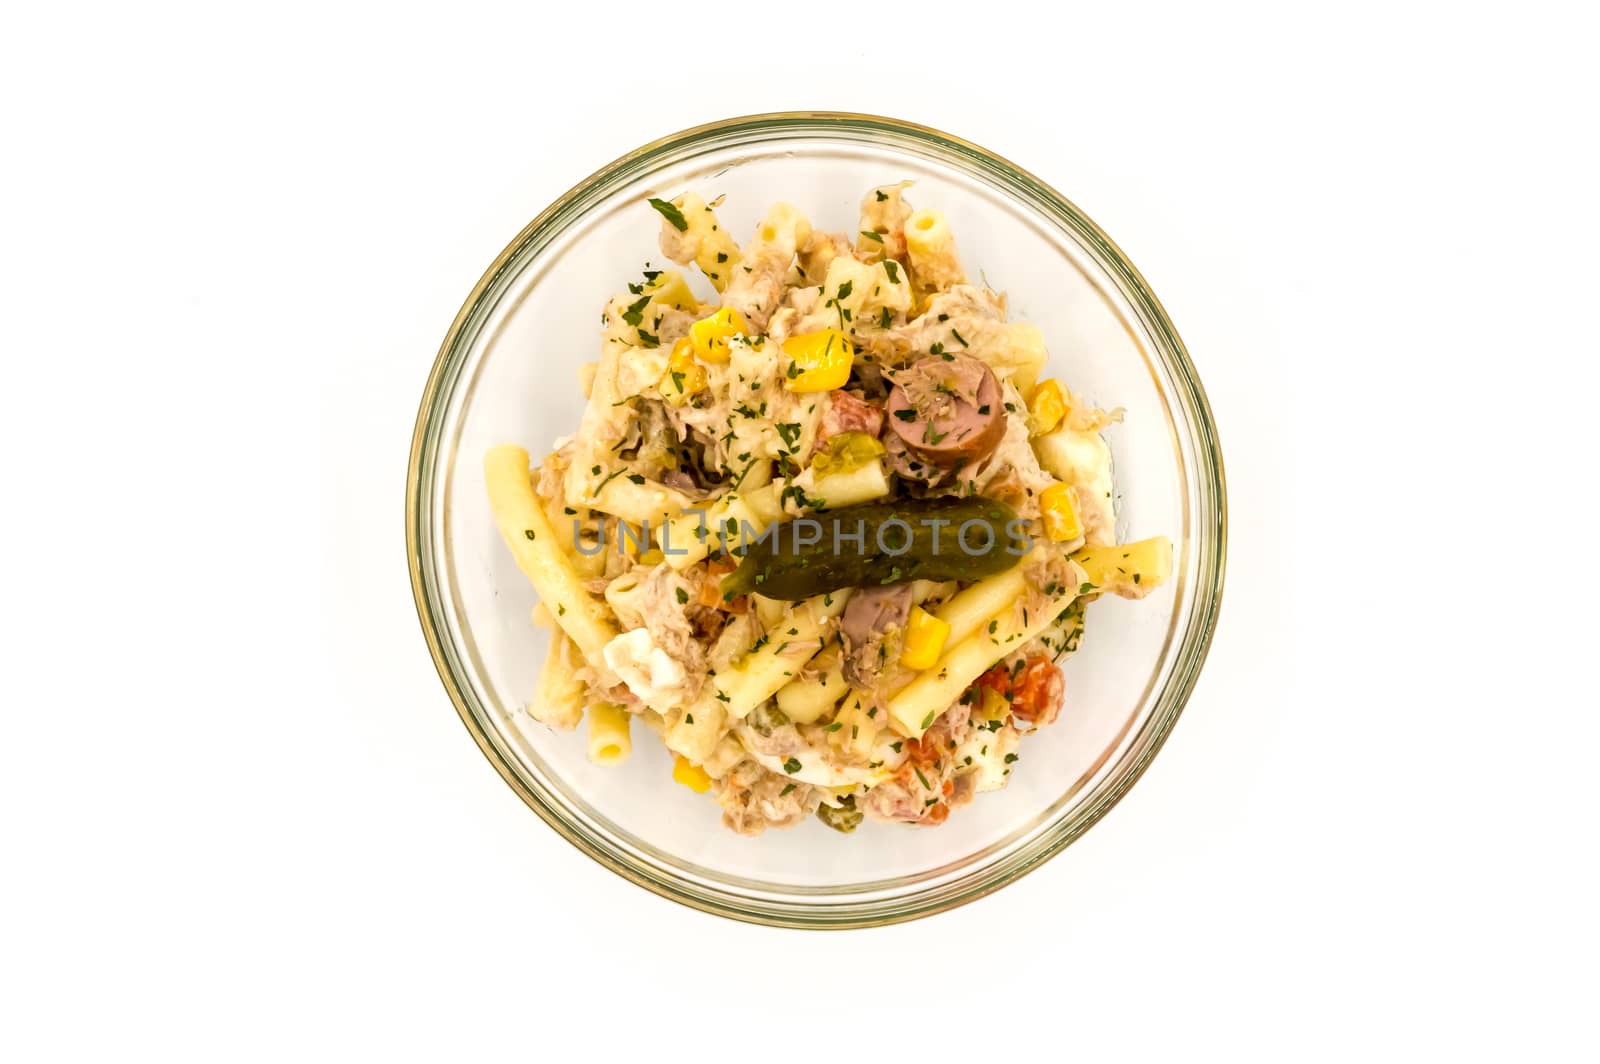 Pasta salad dish with corn, tuna and a pickle  by Philou1000